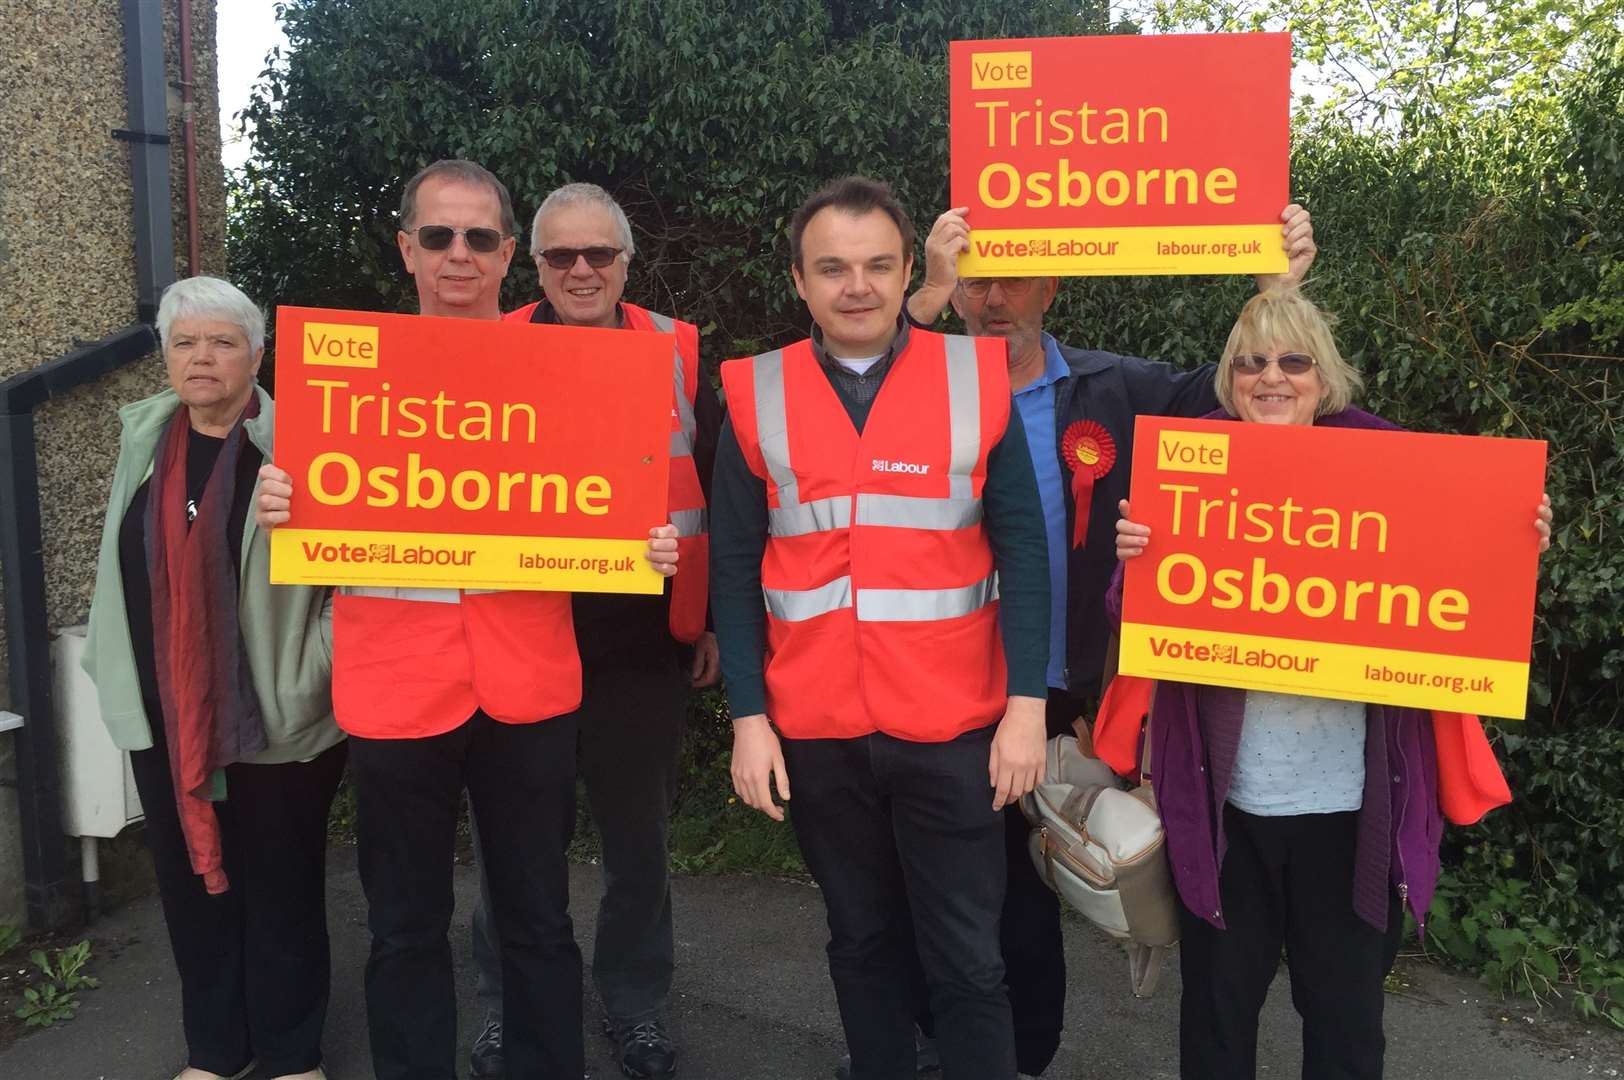 Tristan Osborne campaigning with supporters to become Kent police and crime commissioner in 2016